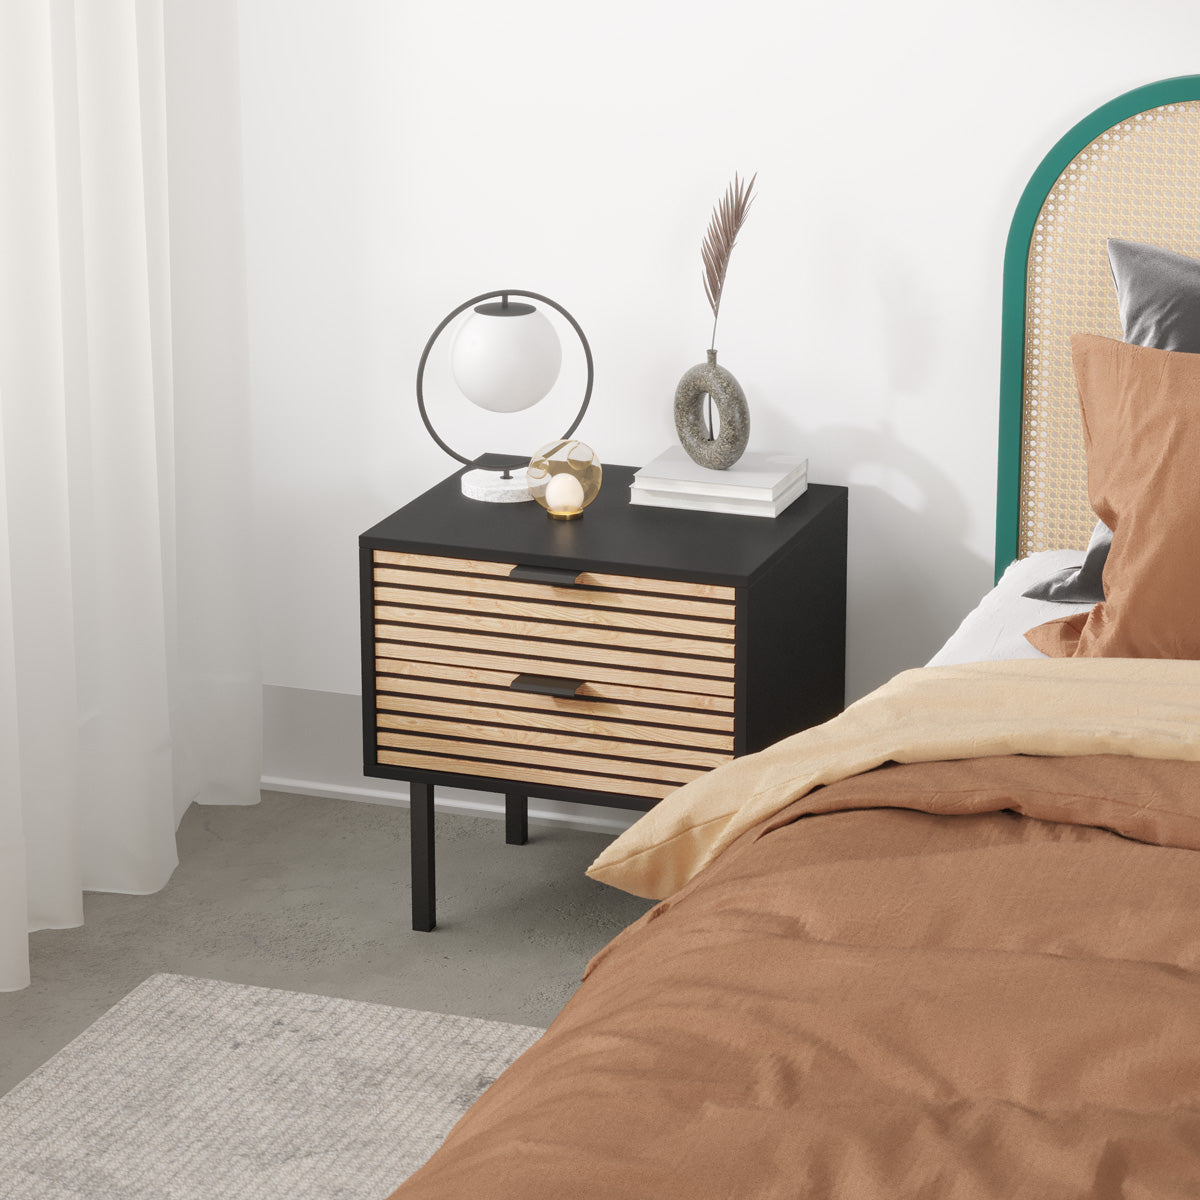 Black Wooden Bedside Table with Slatted Drawers (Zen Collection)